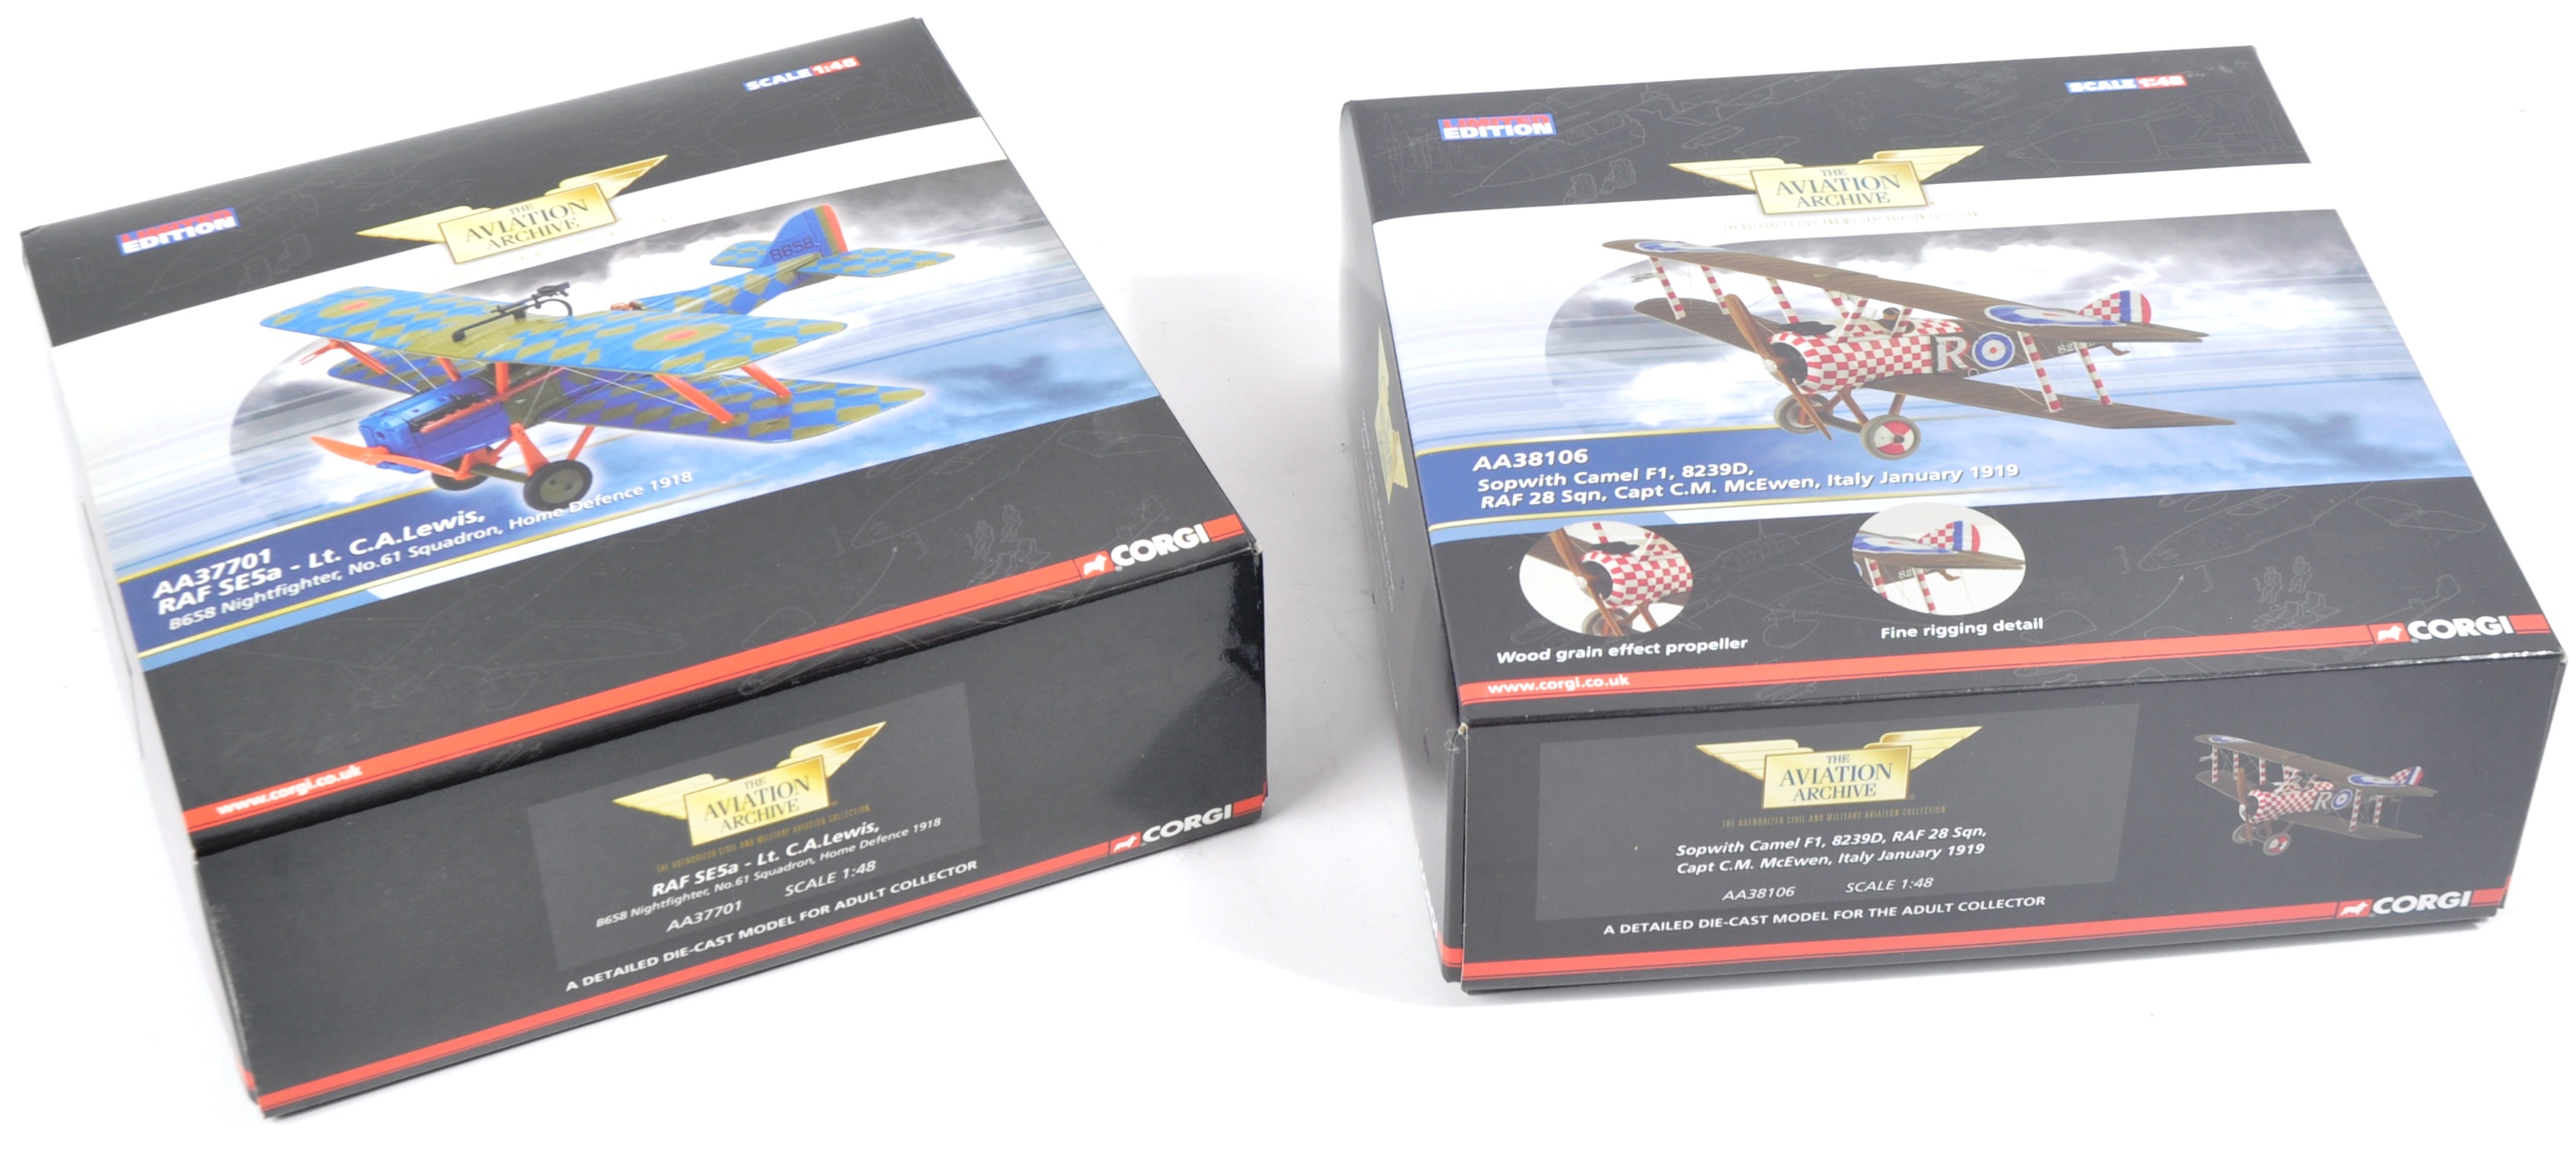 CORGI AVIATION ARCHIVE - TWO BOXED LIMITED EDITION 1/48 SCALE - Image 6 of 6